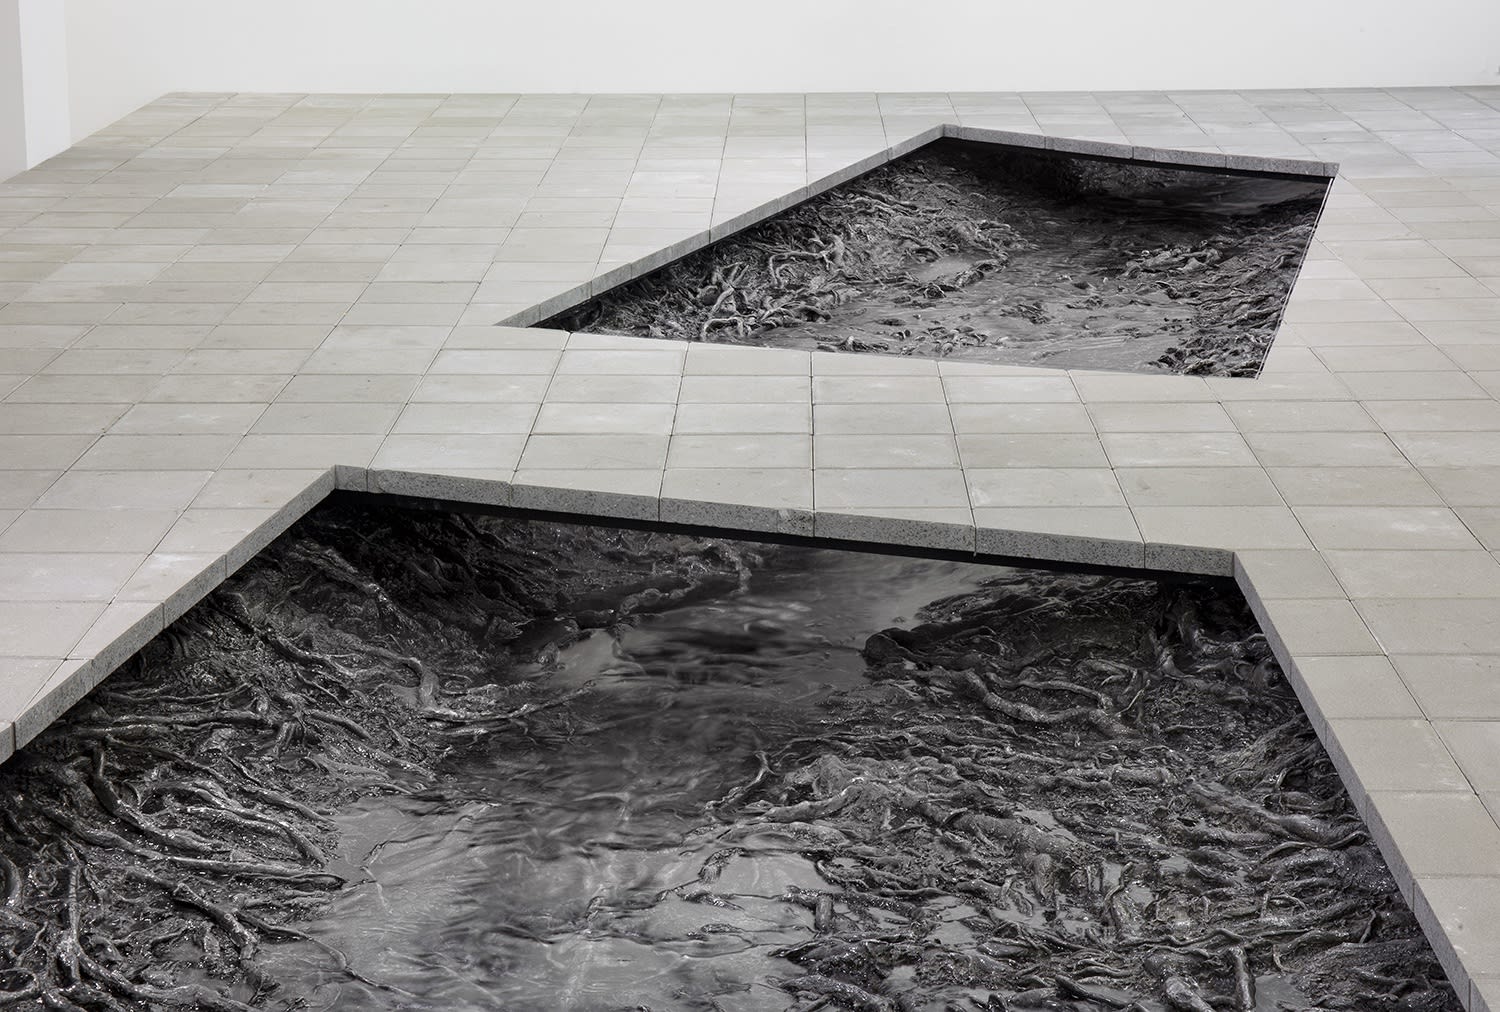 2 rectangular cutouts in the floor reveal a system of shiny, cast roots that appear to be in water.